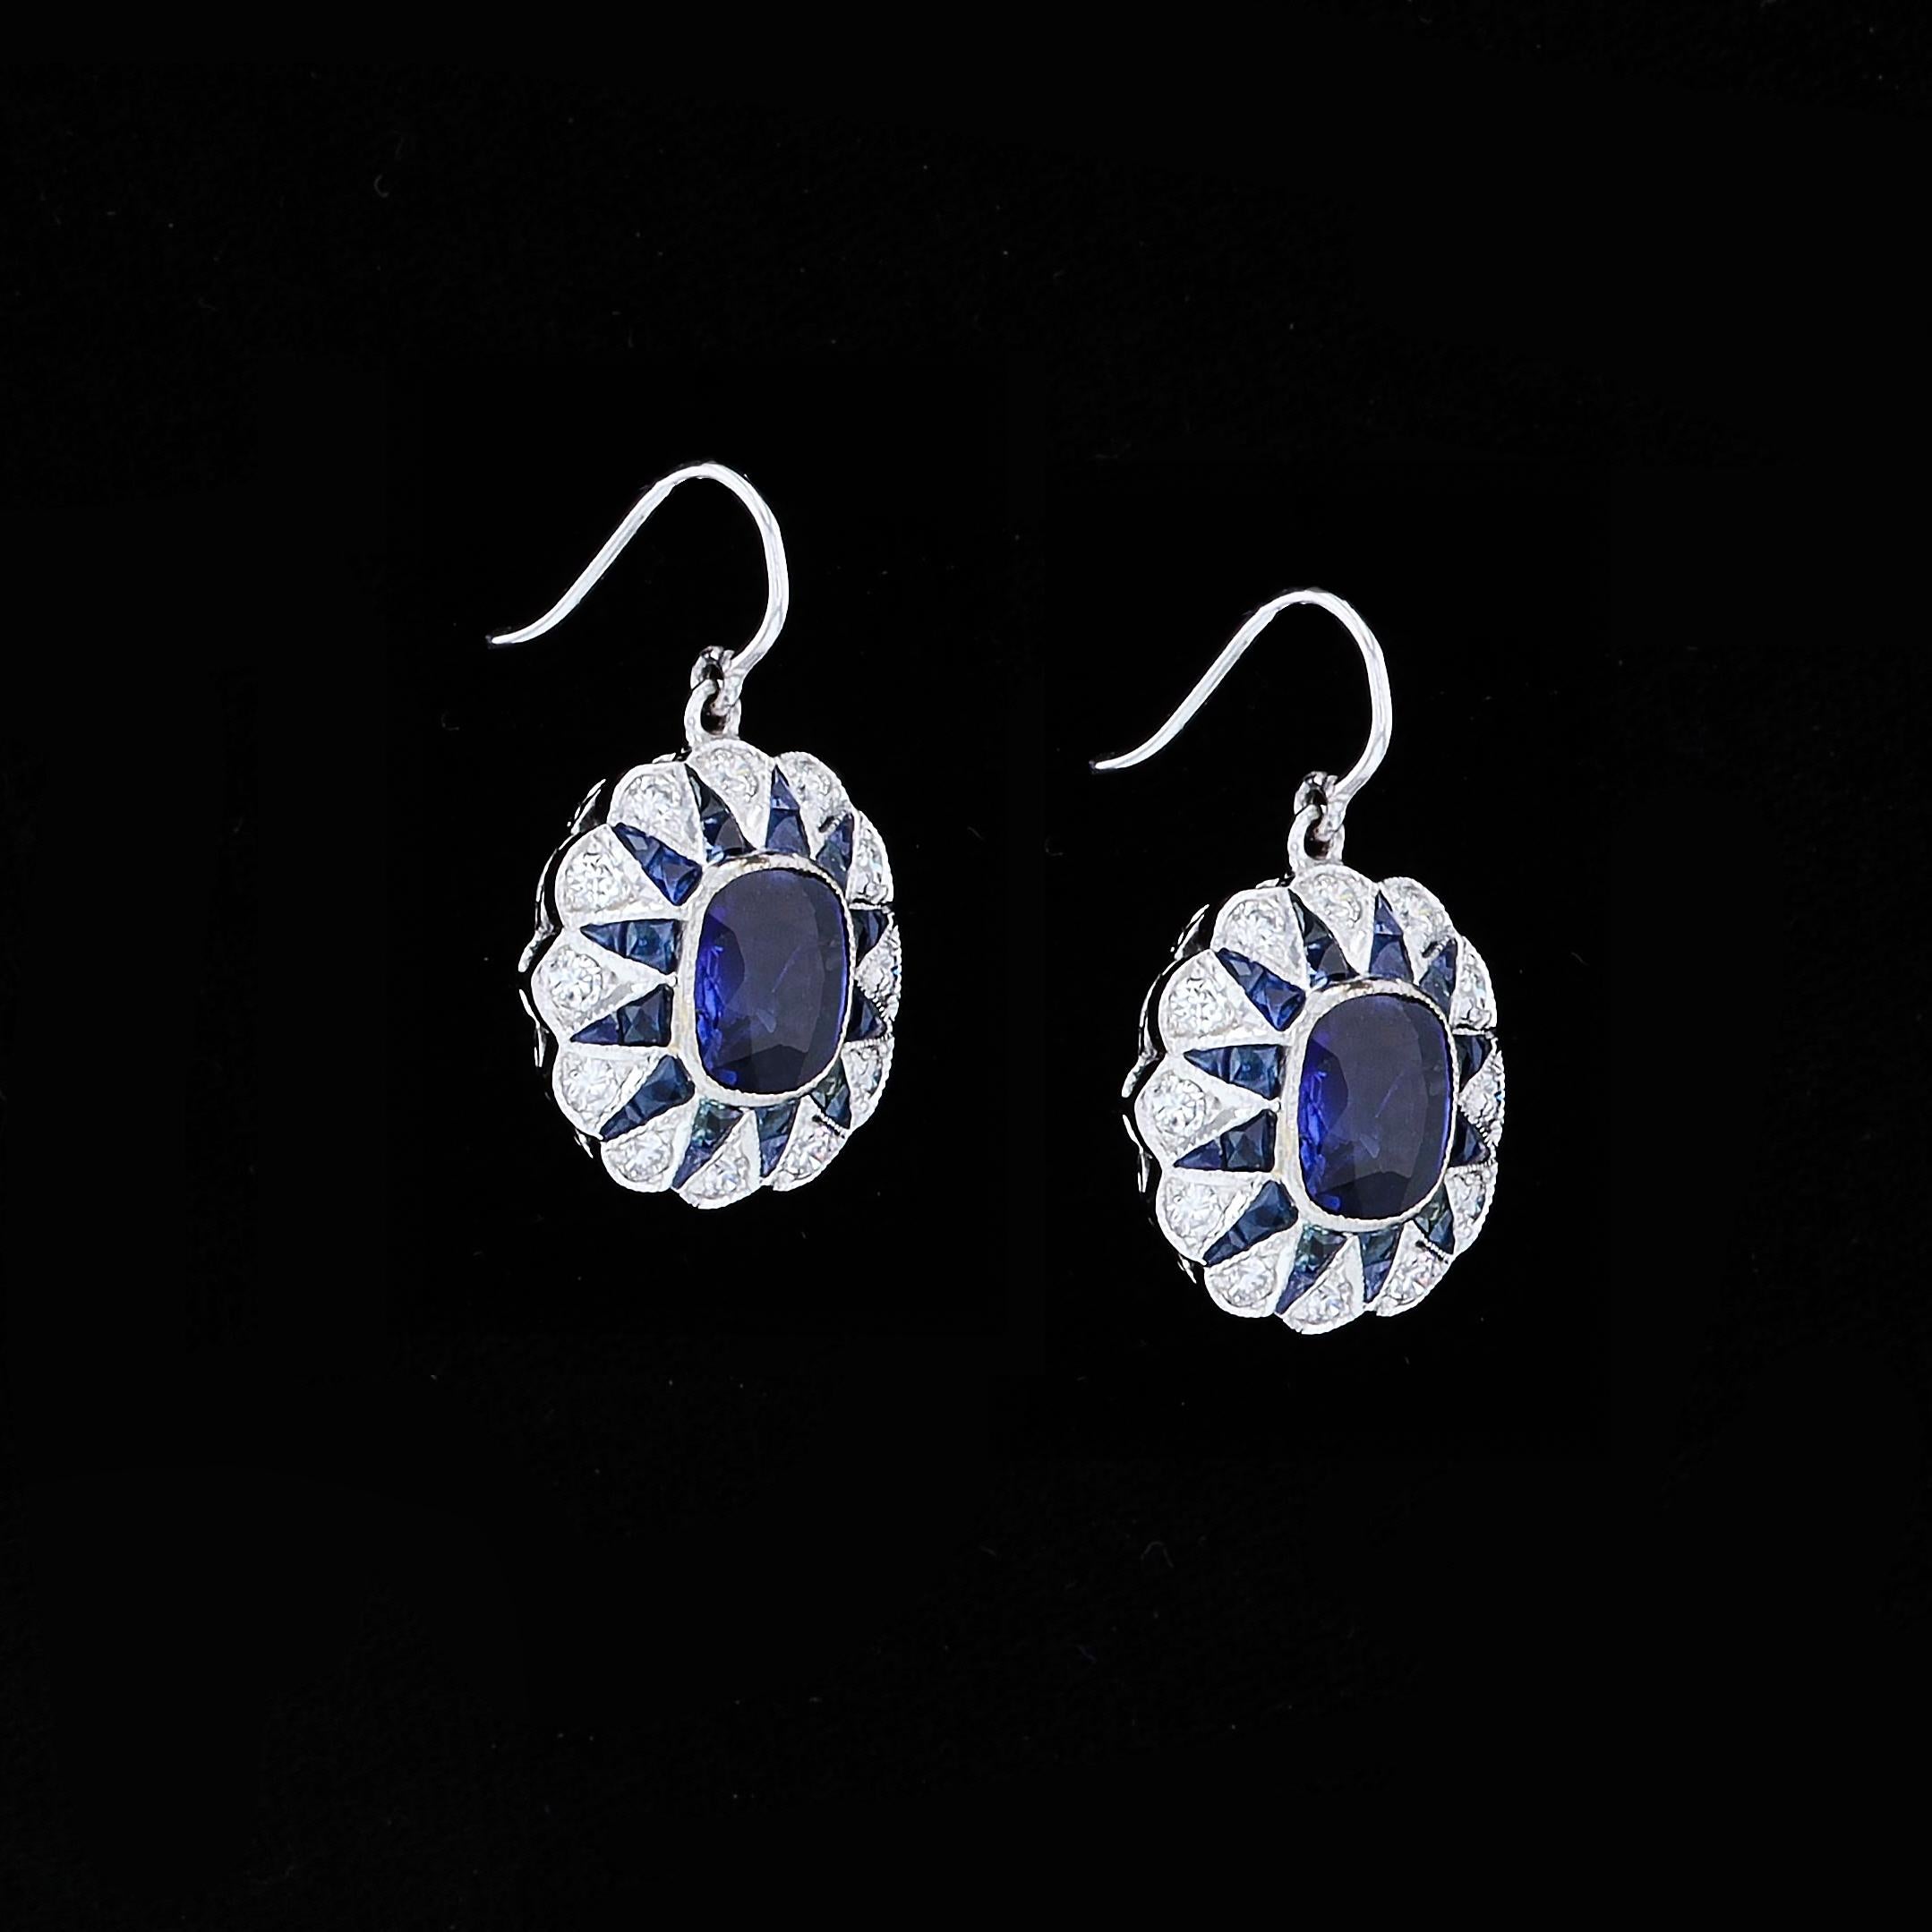 Crafted in 18K White Gold these drop style earrings feature 5.44ct Sapphires 1.21ct Round Cut Diamonds . A stunning pair of earrings, they measure 23mm by 15.5mm and weigh 5.7 grams.

